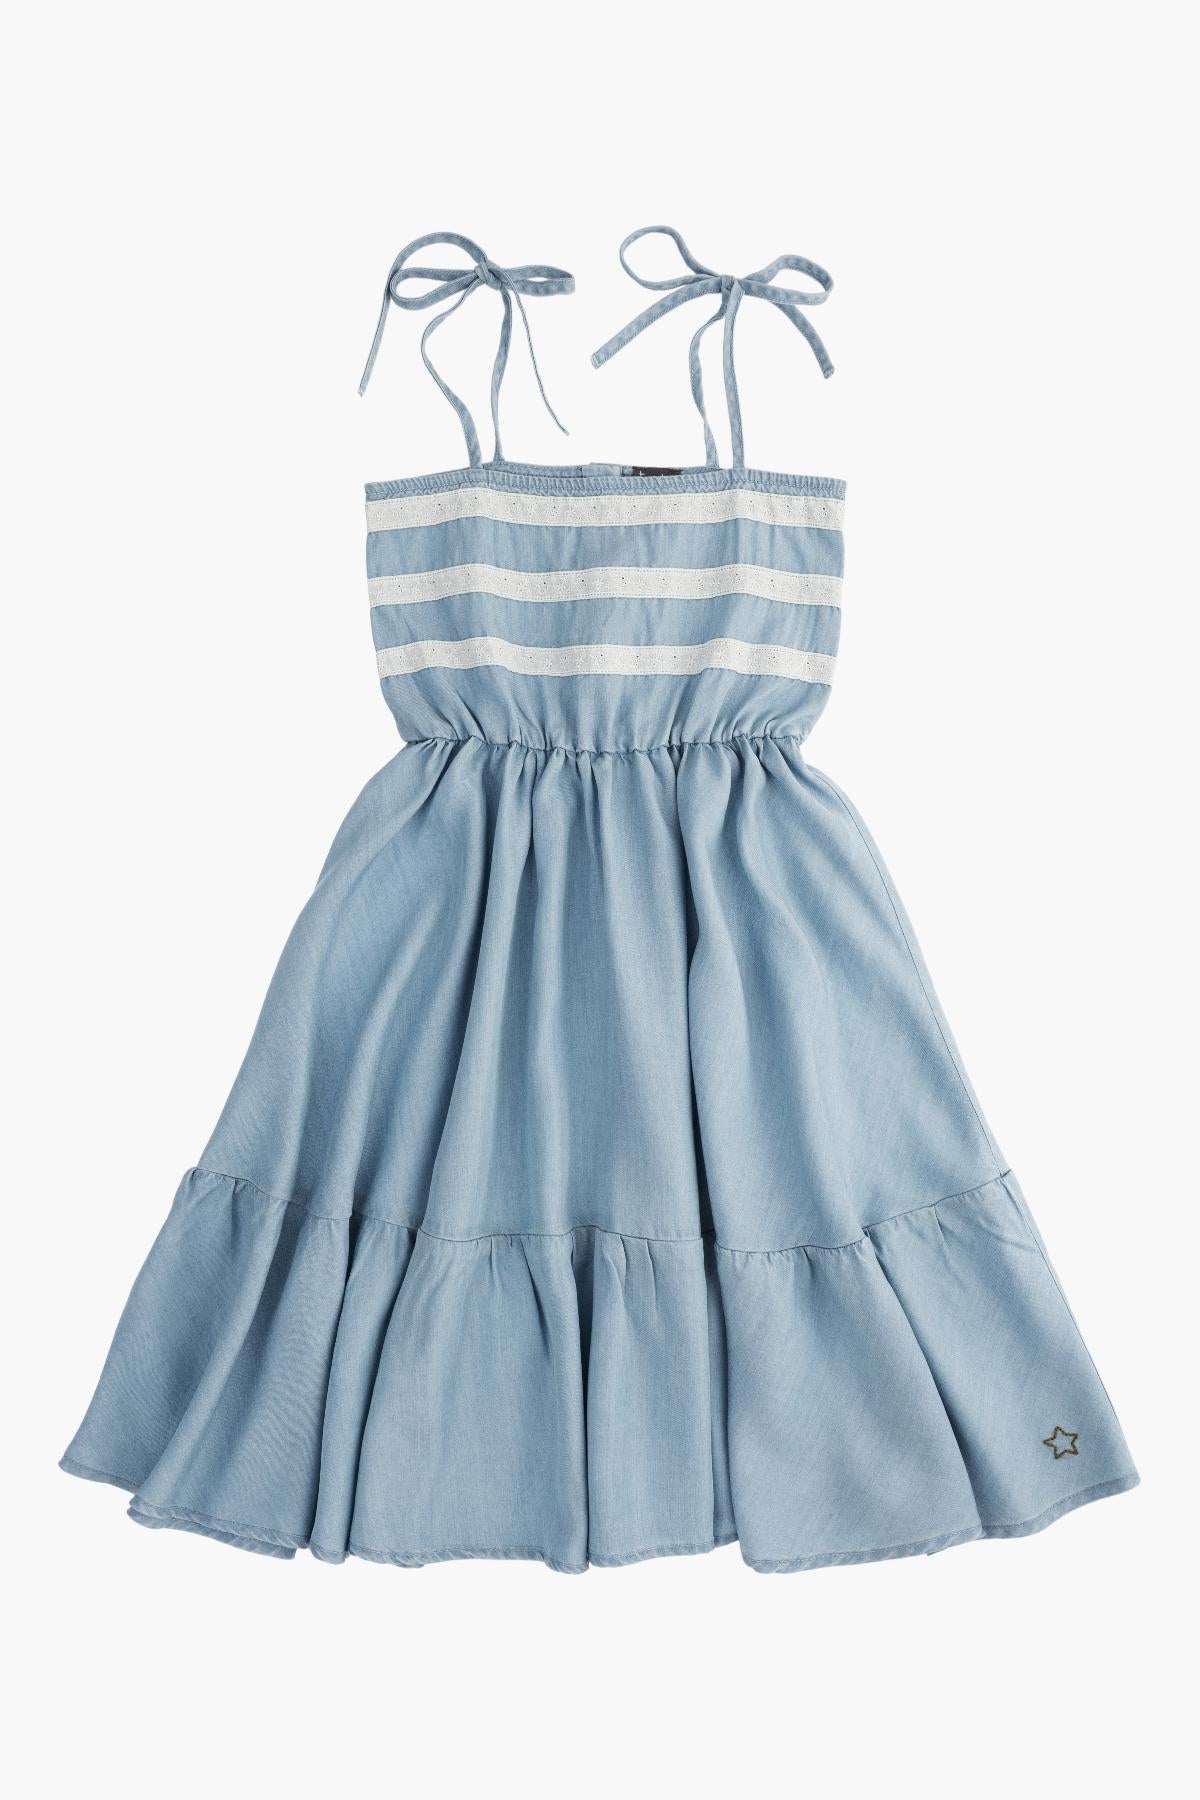 Girls Dress Tocoto Vintage Denim And Lace (Size 4 left) – Mini Ruby